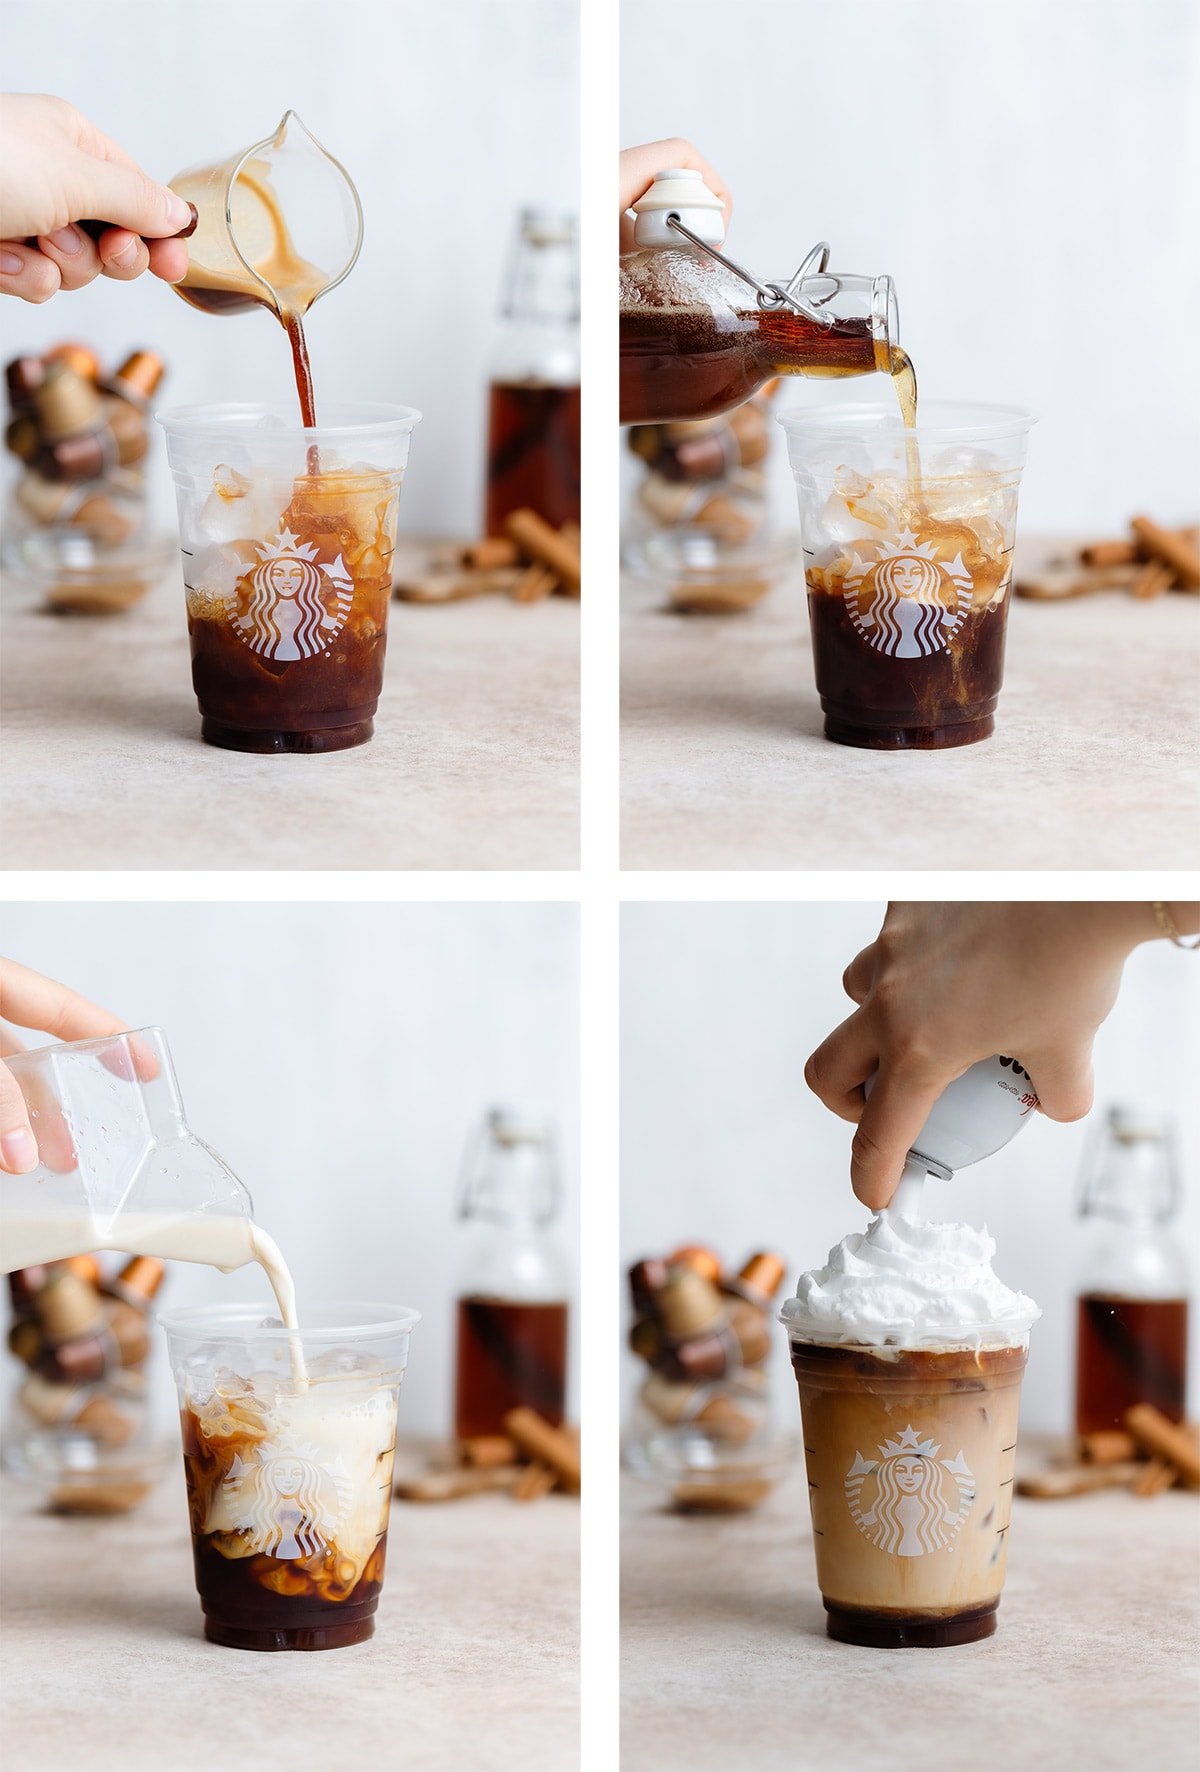 Four photos showing how to make iced cinnamon latte from pouring in coffee, syrup, and milk, to topping it with whipped cream.